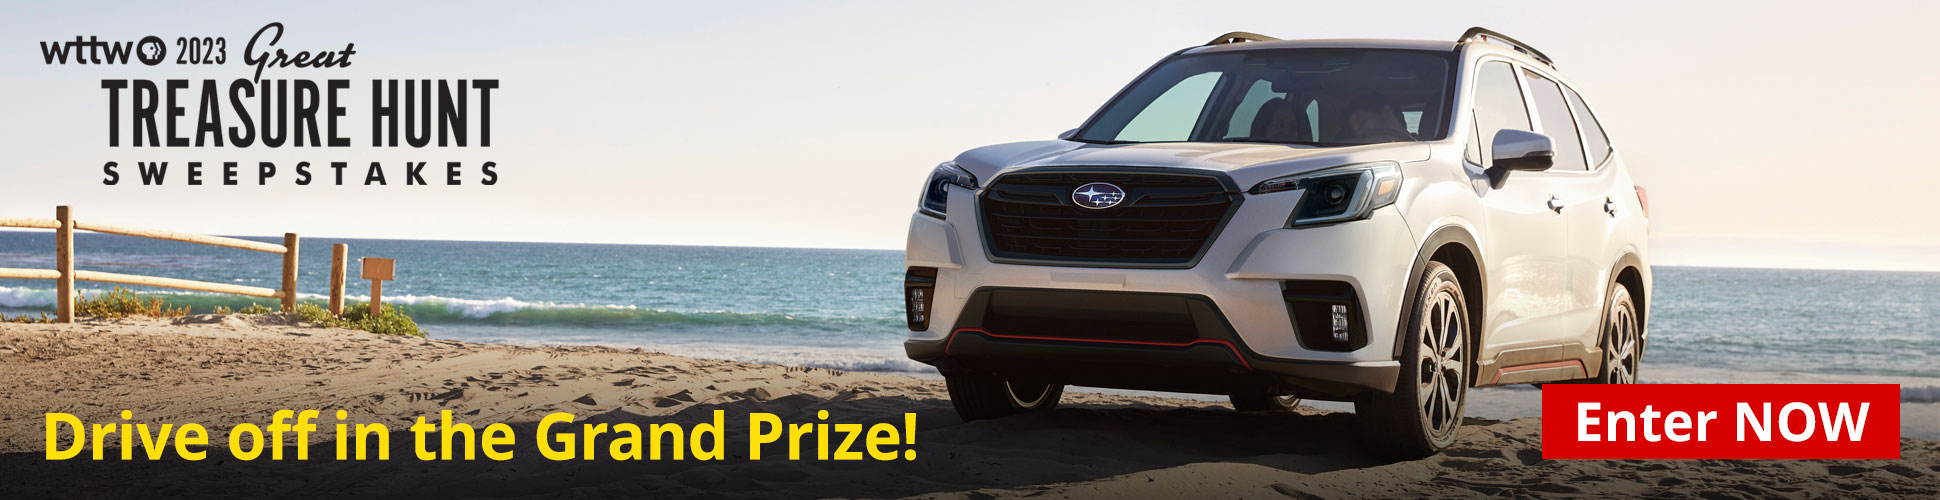 Win a Subaru in Chicago, IL WTTW 2023 Great Treasure Hunt Sweepstakes